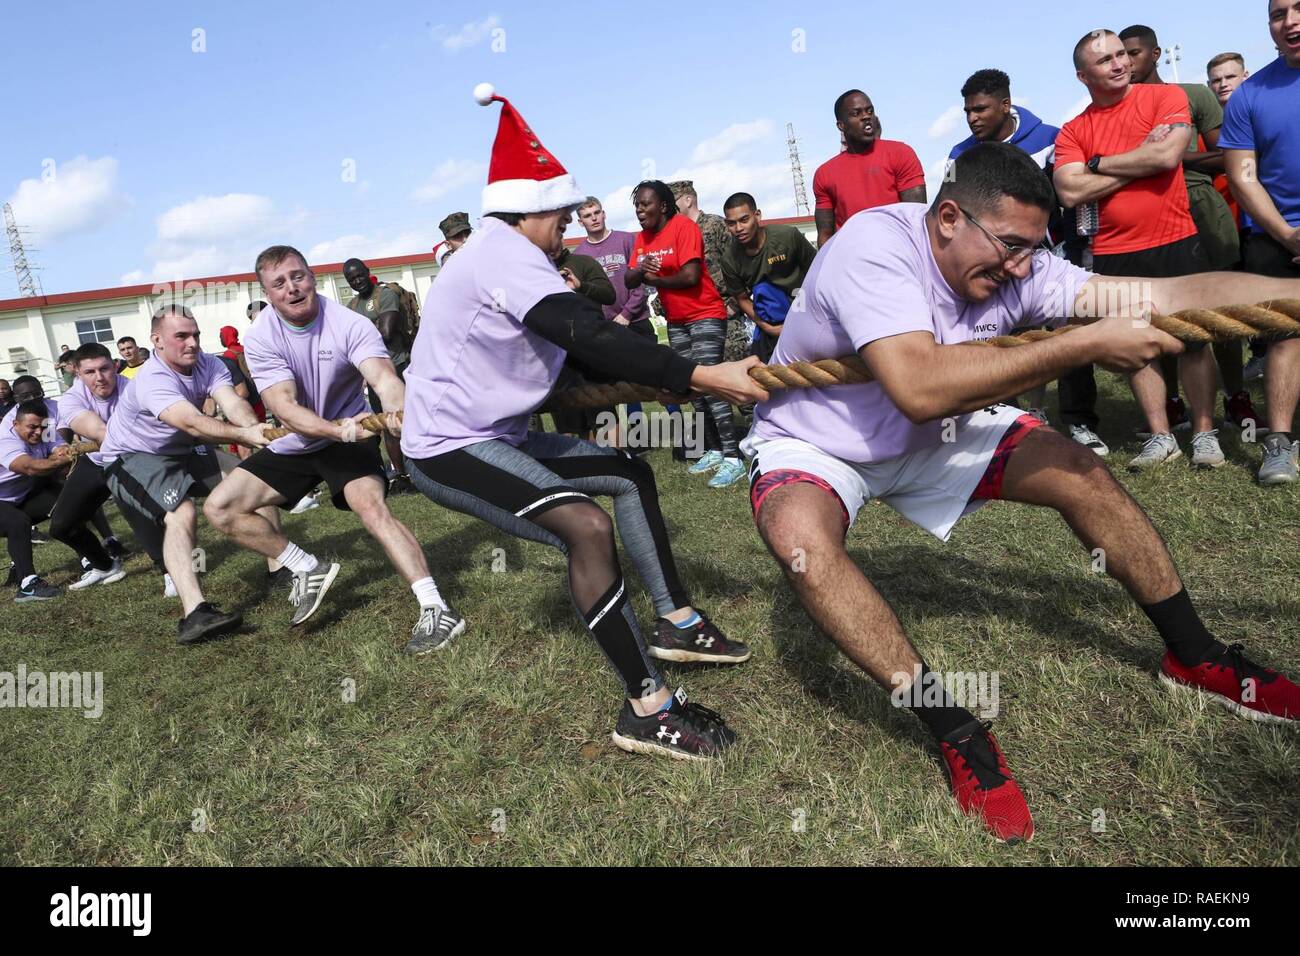 U.S. Marines assigned to Marine Tactical Air Command Squadron 18, 1st Marine Aircraft Wing, participate in tug-of-war during the Jingle Bell Challenge on Camp Foster, Okinawa, Japan, Dec. 14, 2018. The challenge was held to promote cohesion between Navy and Marine Corps units aboard MCB Camp Butler by participating in various competitions like tire flipping, a five kilometer run, and ammunition can lifts. Stock Photo